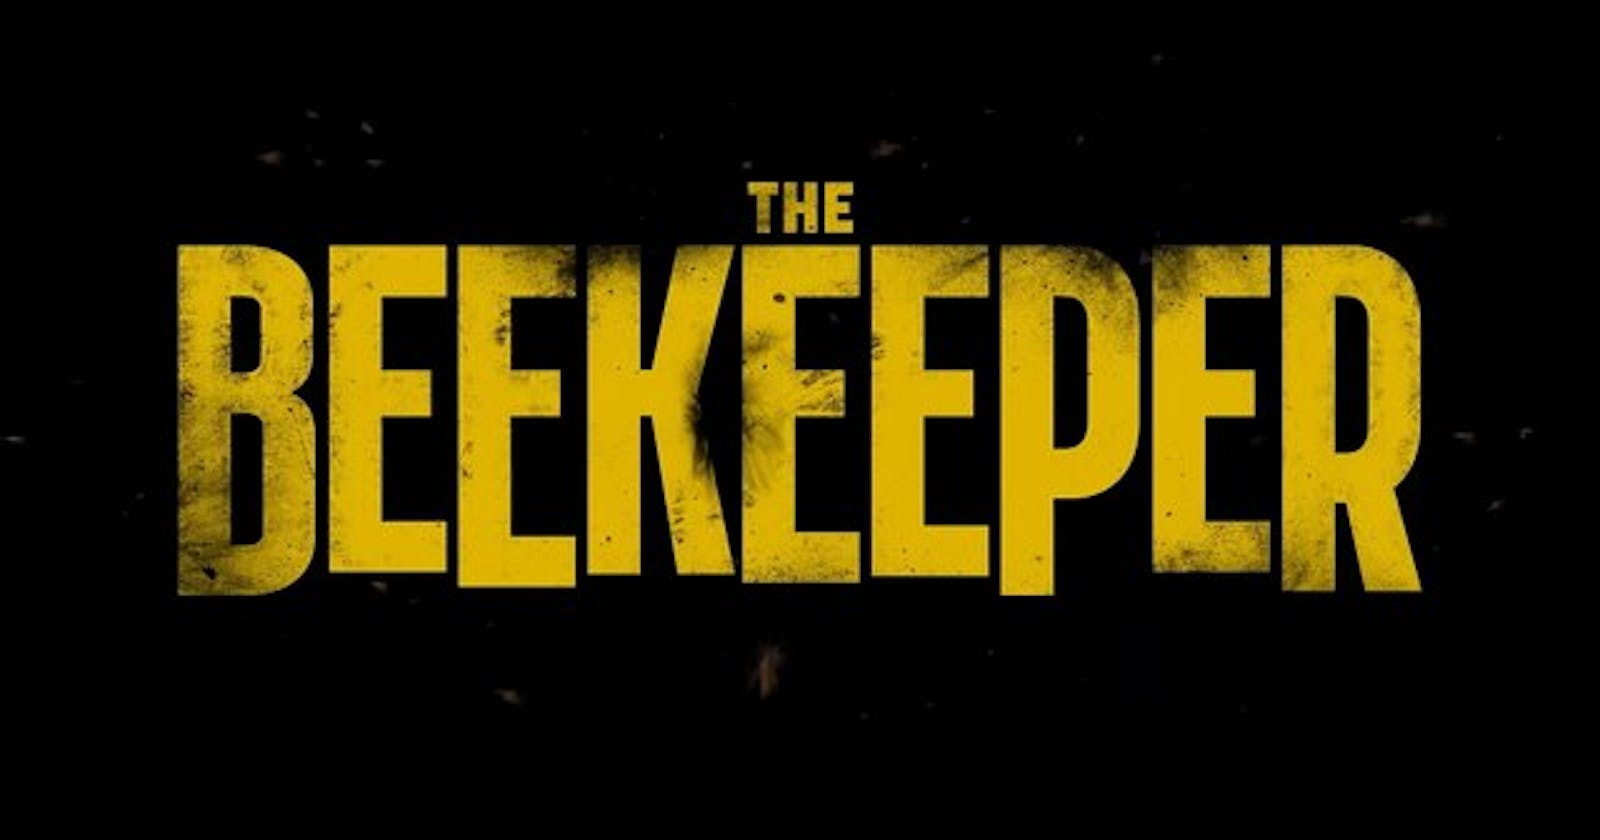 The Beekeeper: Release Date, Cast, Trailer And Latest News